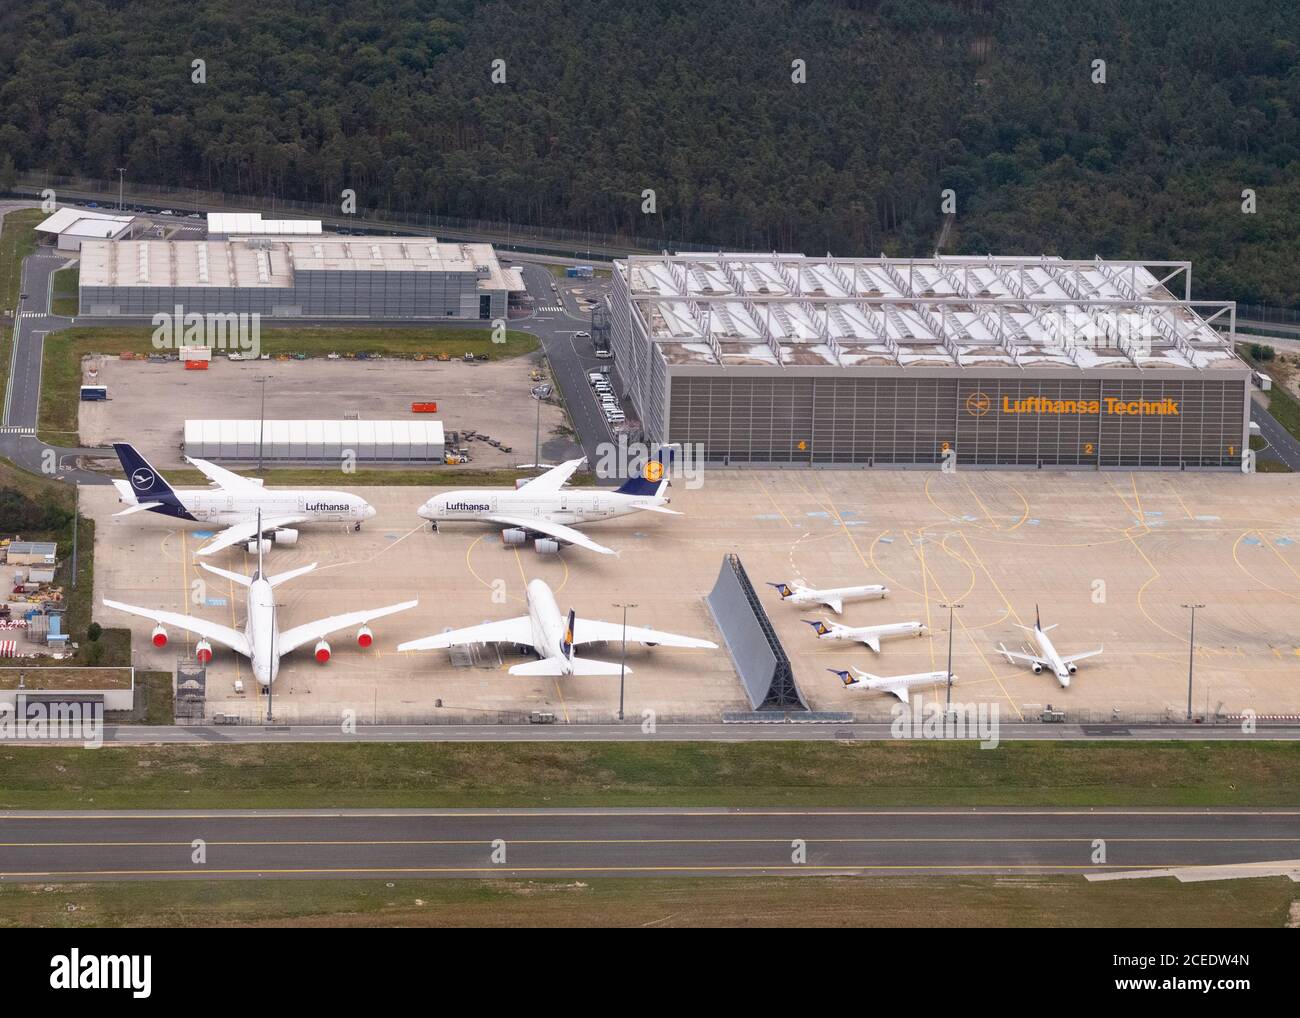 Lufthansa airbus A380 planes grounded and parked with windows sealed outside Lufthansa Technik during coronavirus pandemic 2020, Frankfurt, Germany Stock Photo